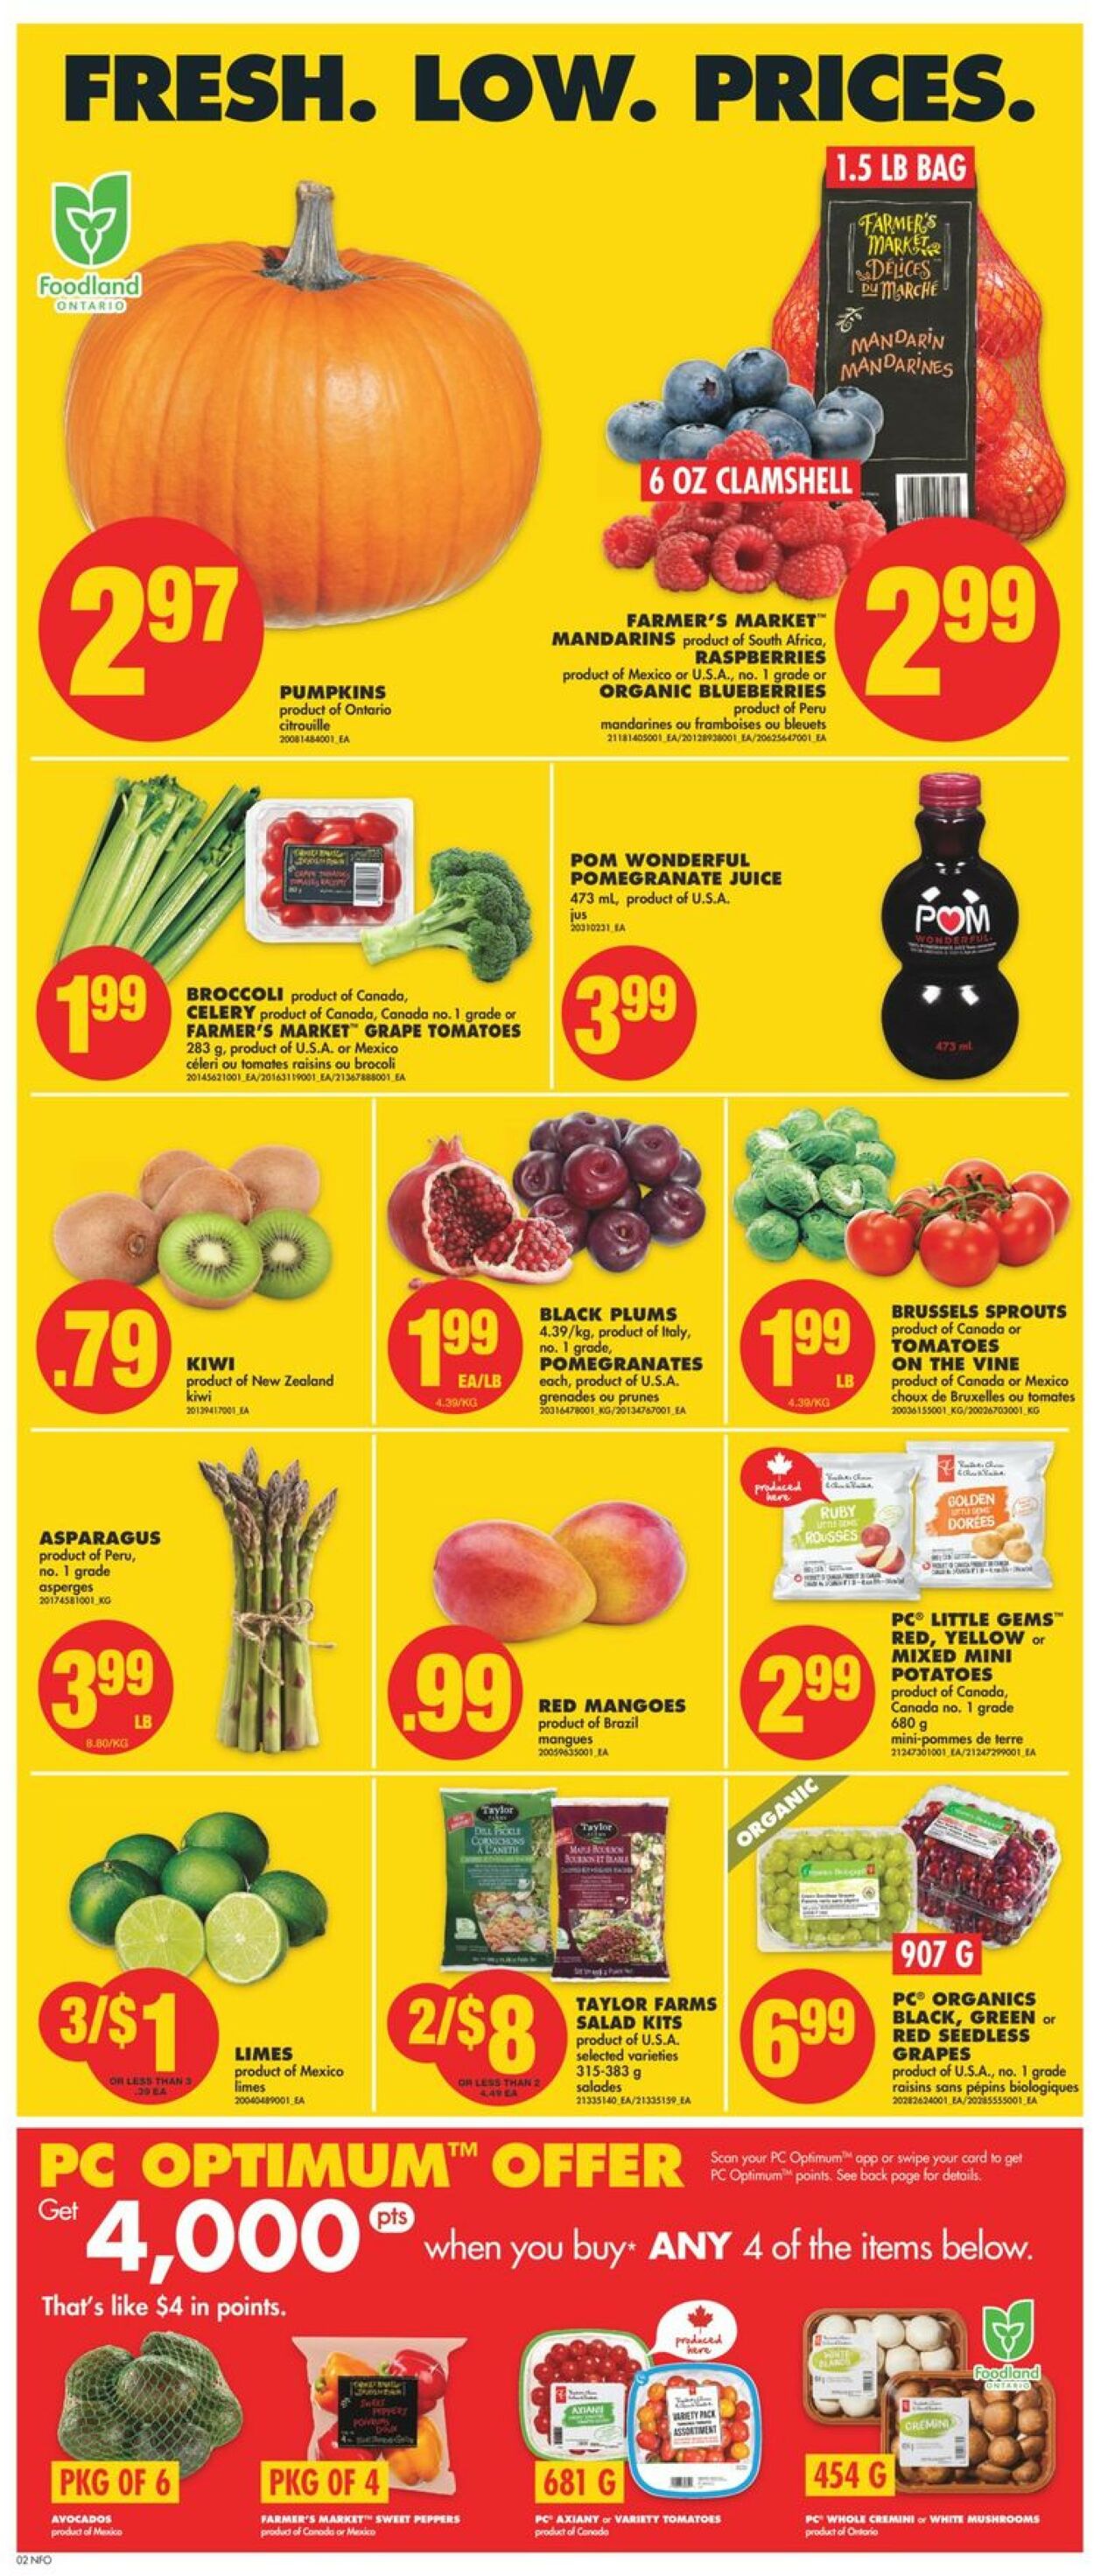 No Frills Flyer - 10/13-10/19/2022 (Page 3)